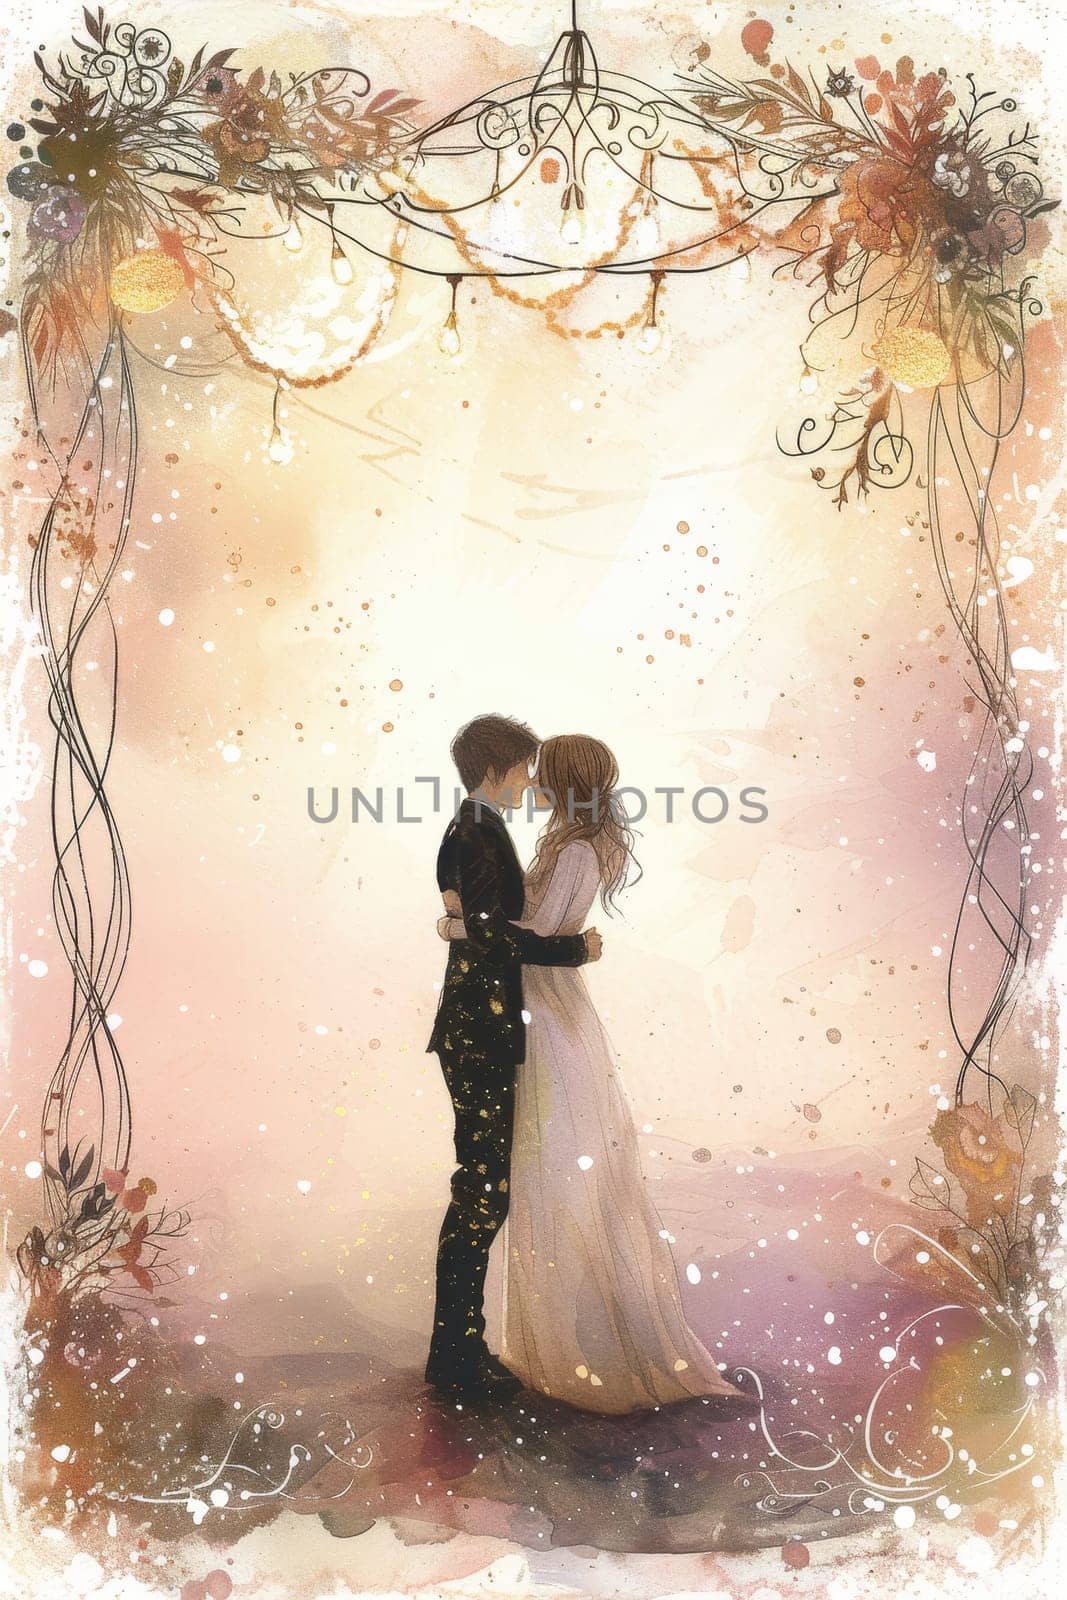 Silhouette of a couple embracing in a watercolor-inspired scene with whimsical florals